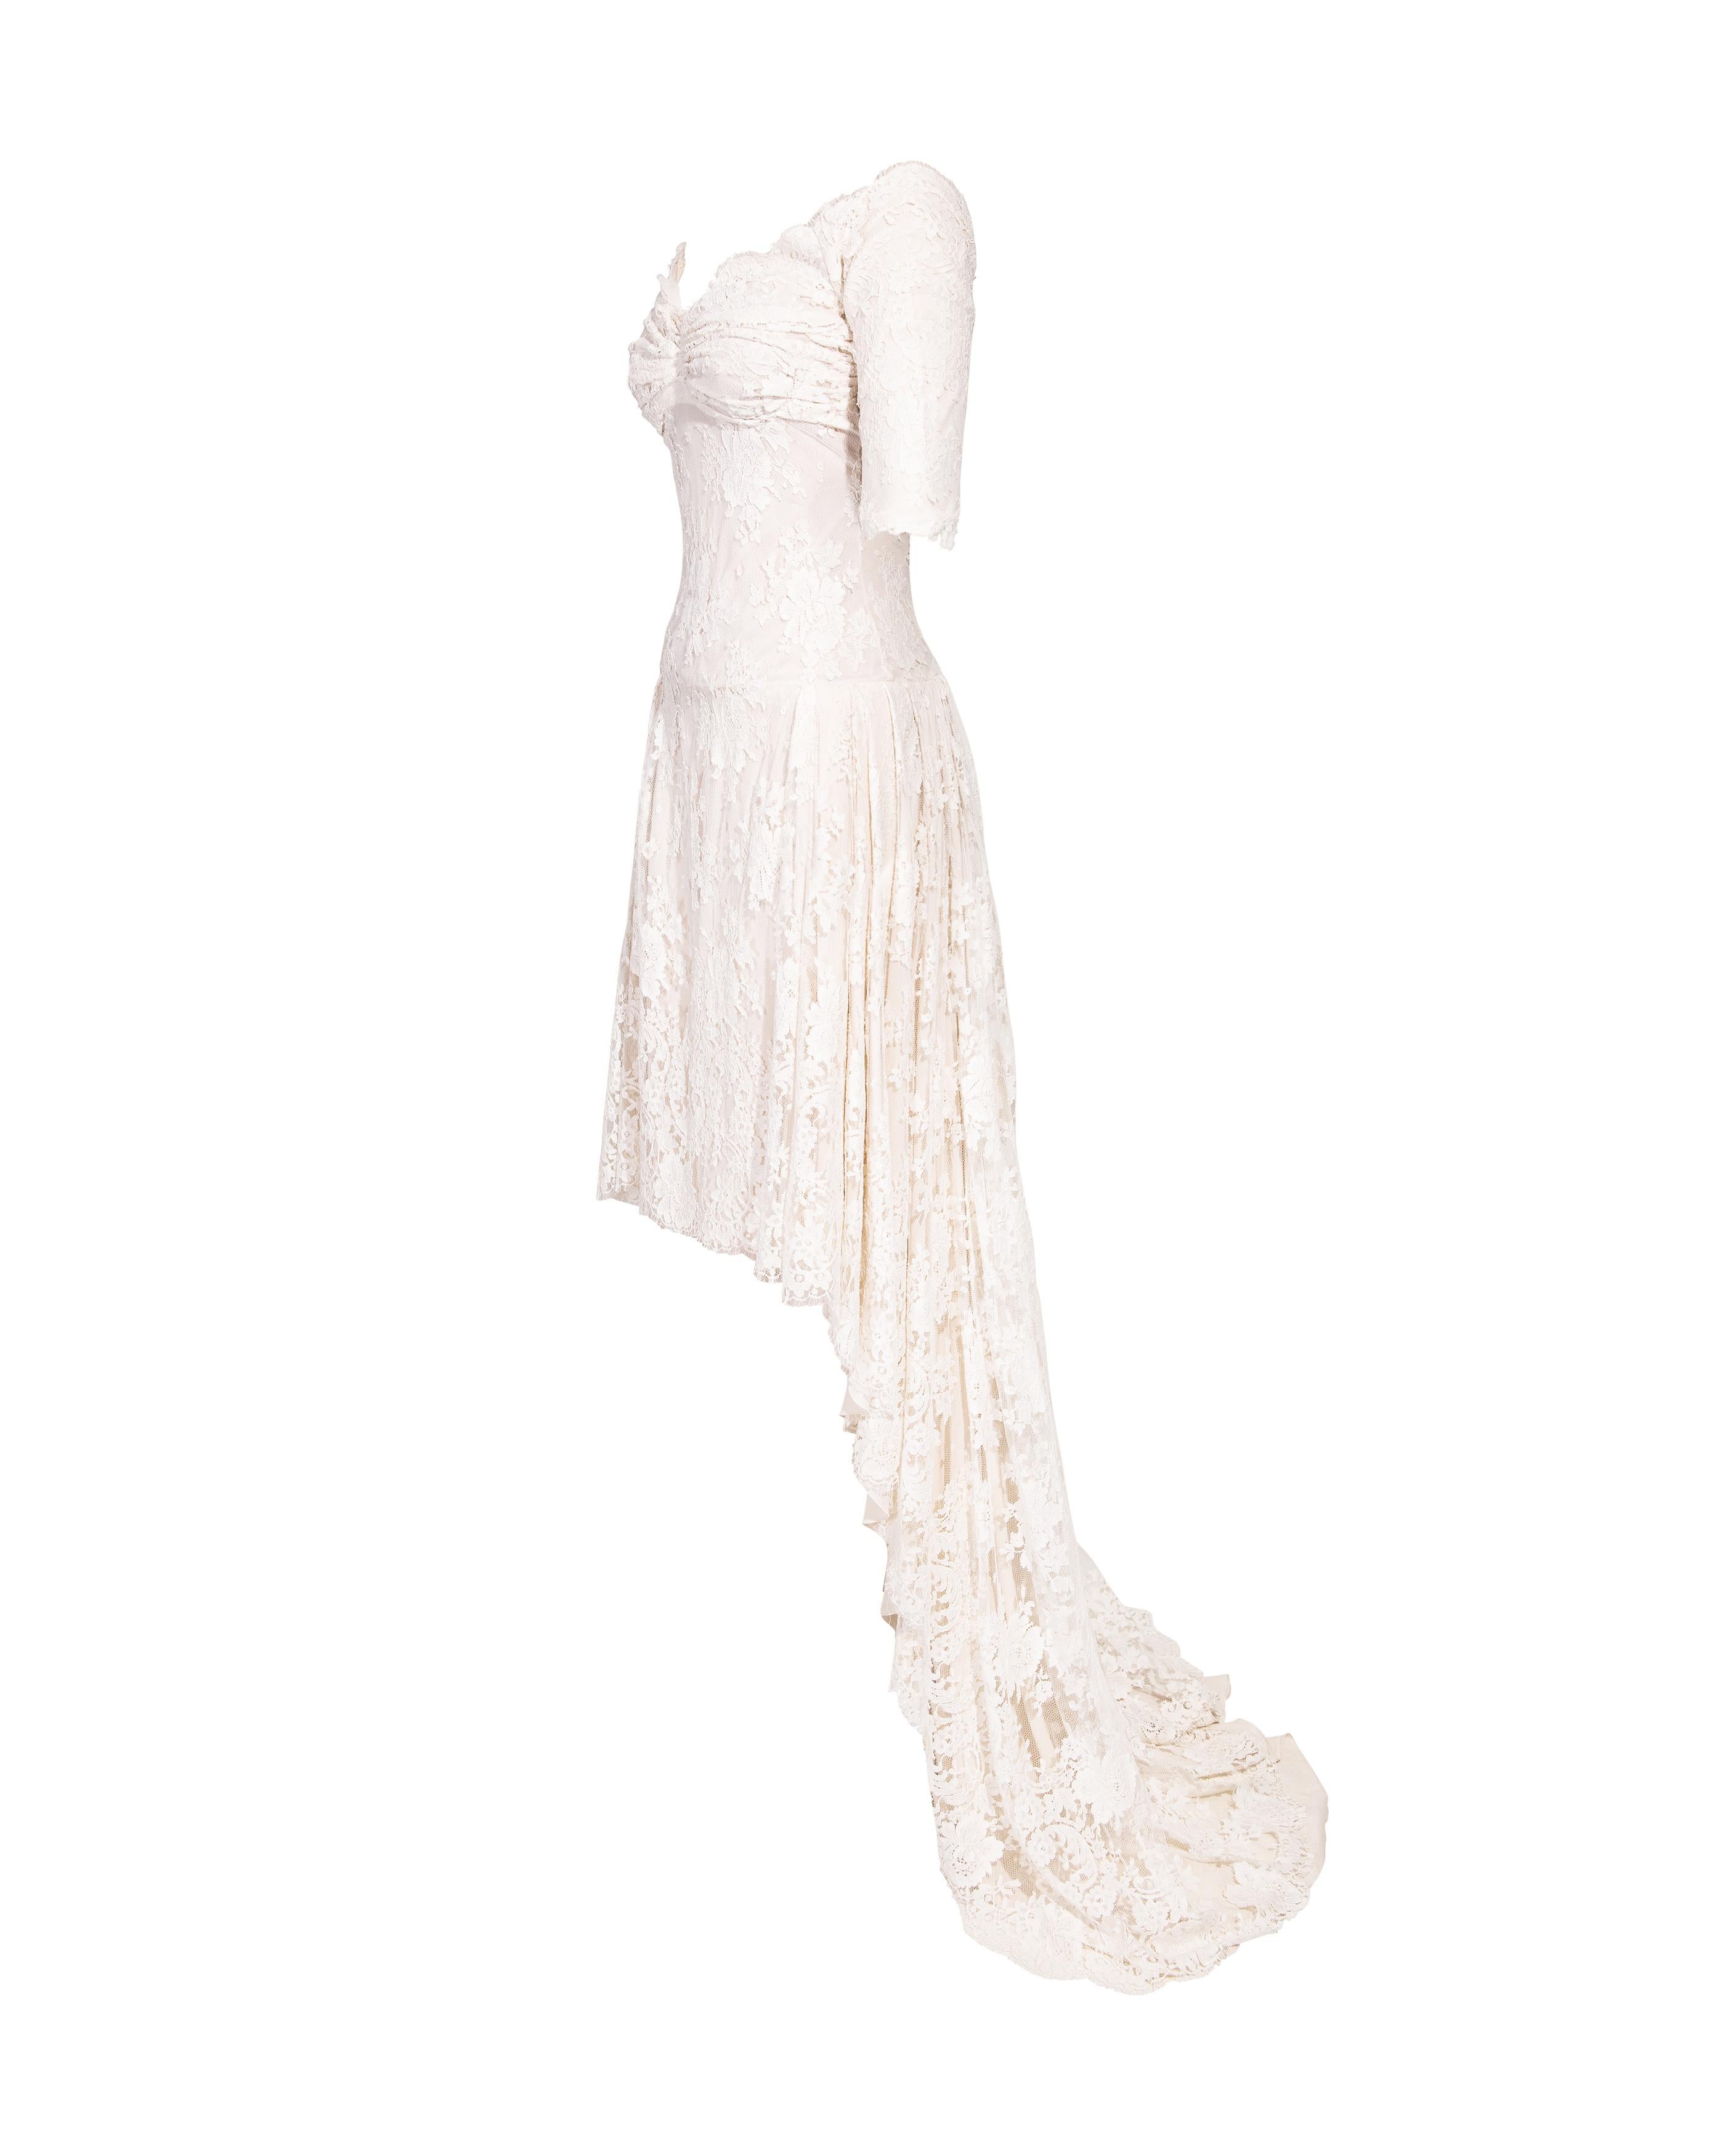 S/S 2007 Alexander McQueen (Lifetime) White Lace Off-Shoulder Gown with Train In Excellent Condition For Sale In North Hollywood, CA